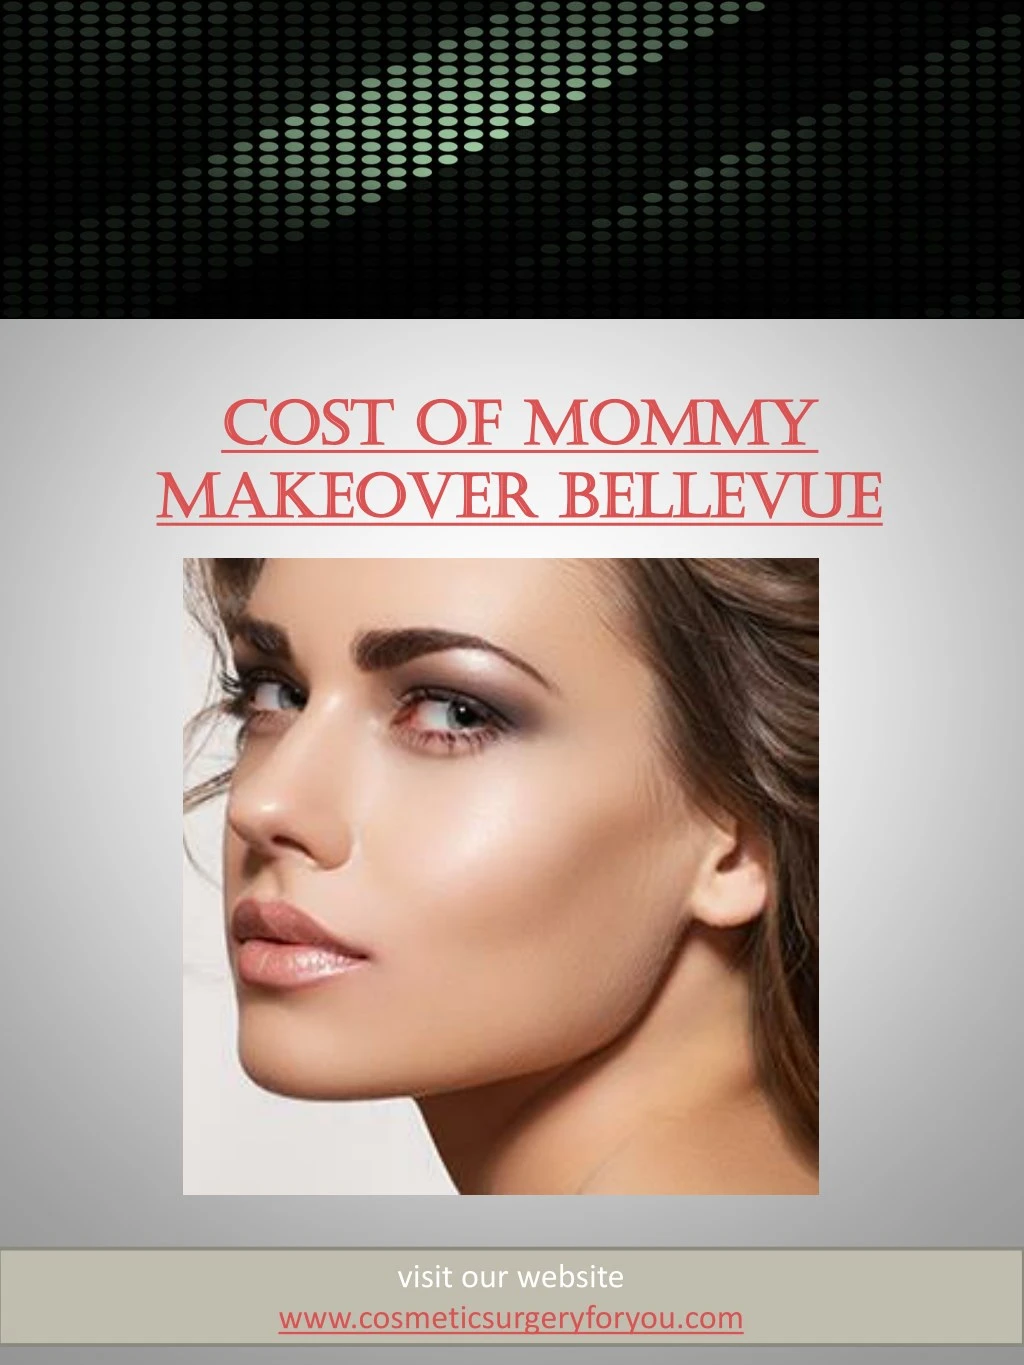 cost of mommy cost of mommy makeover bellevue